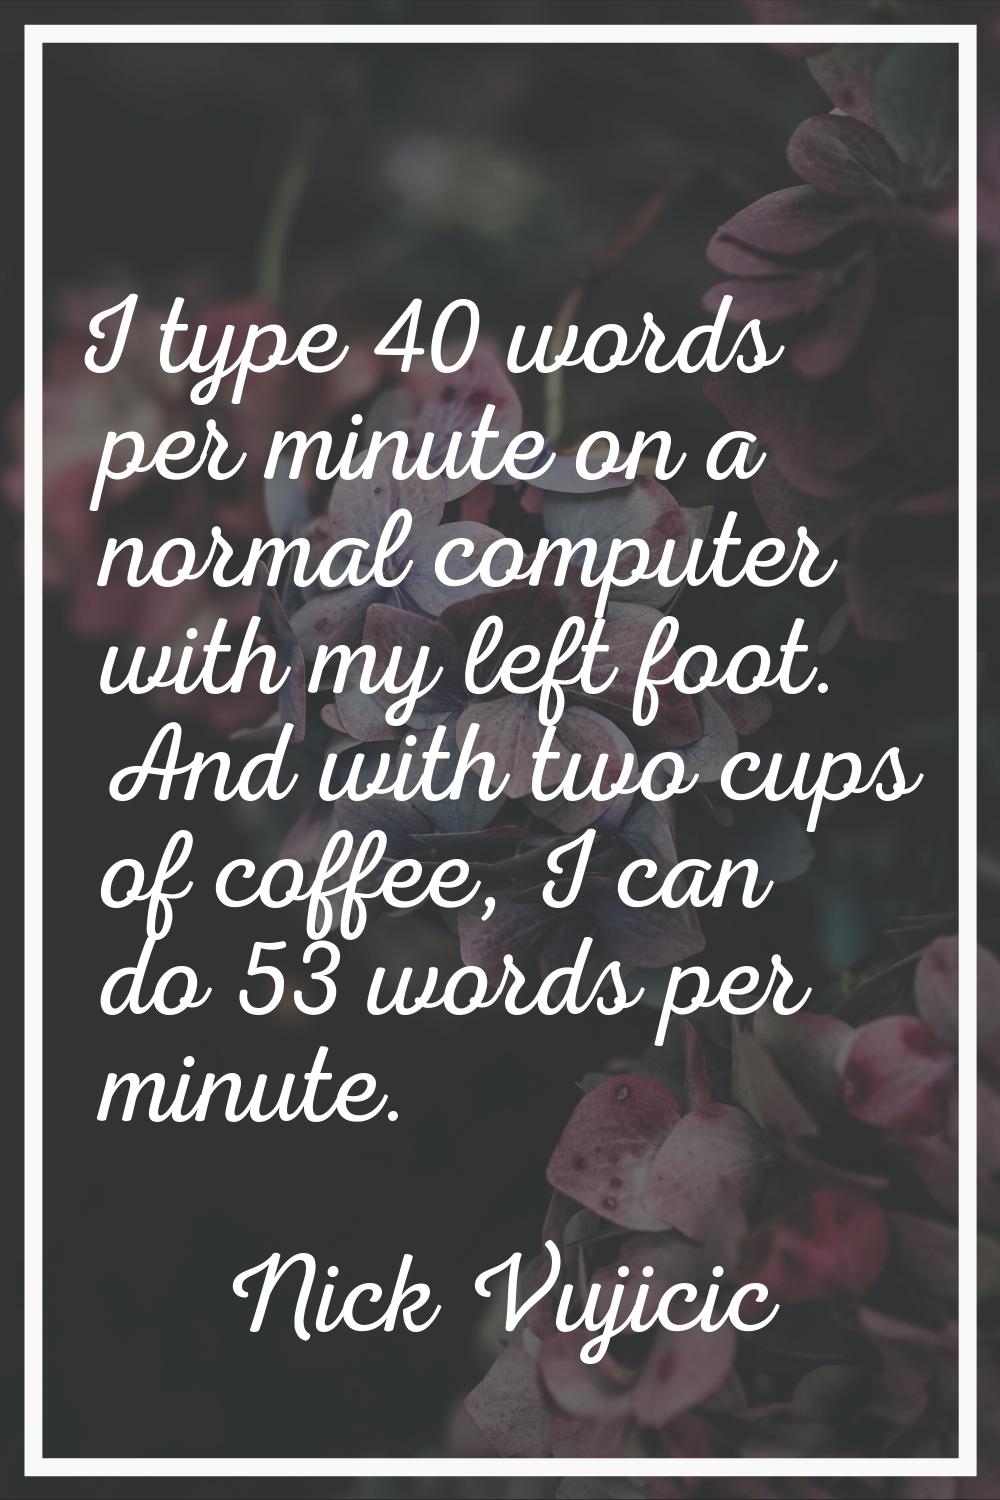 I type 40 words per minute on a normal computer with my left foot. And with two cups of coffee, I c